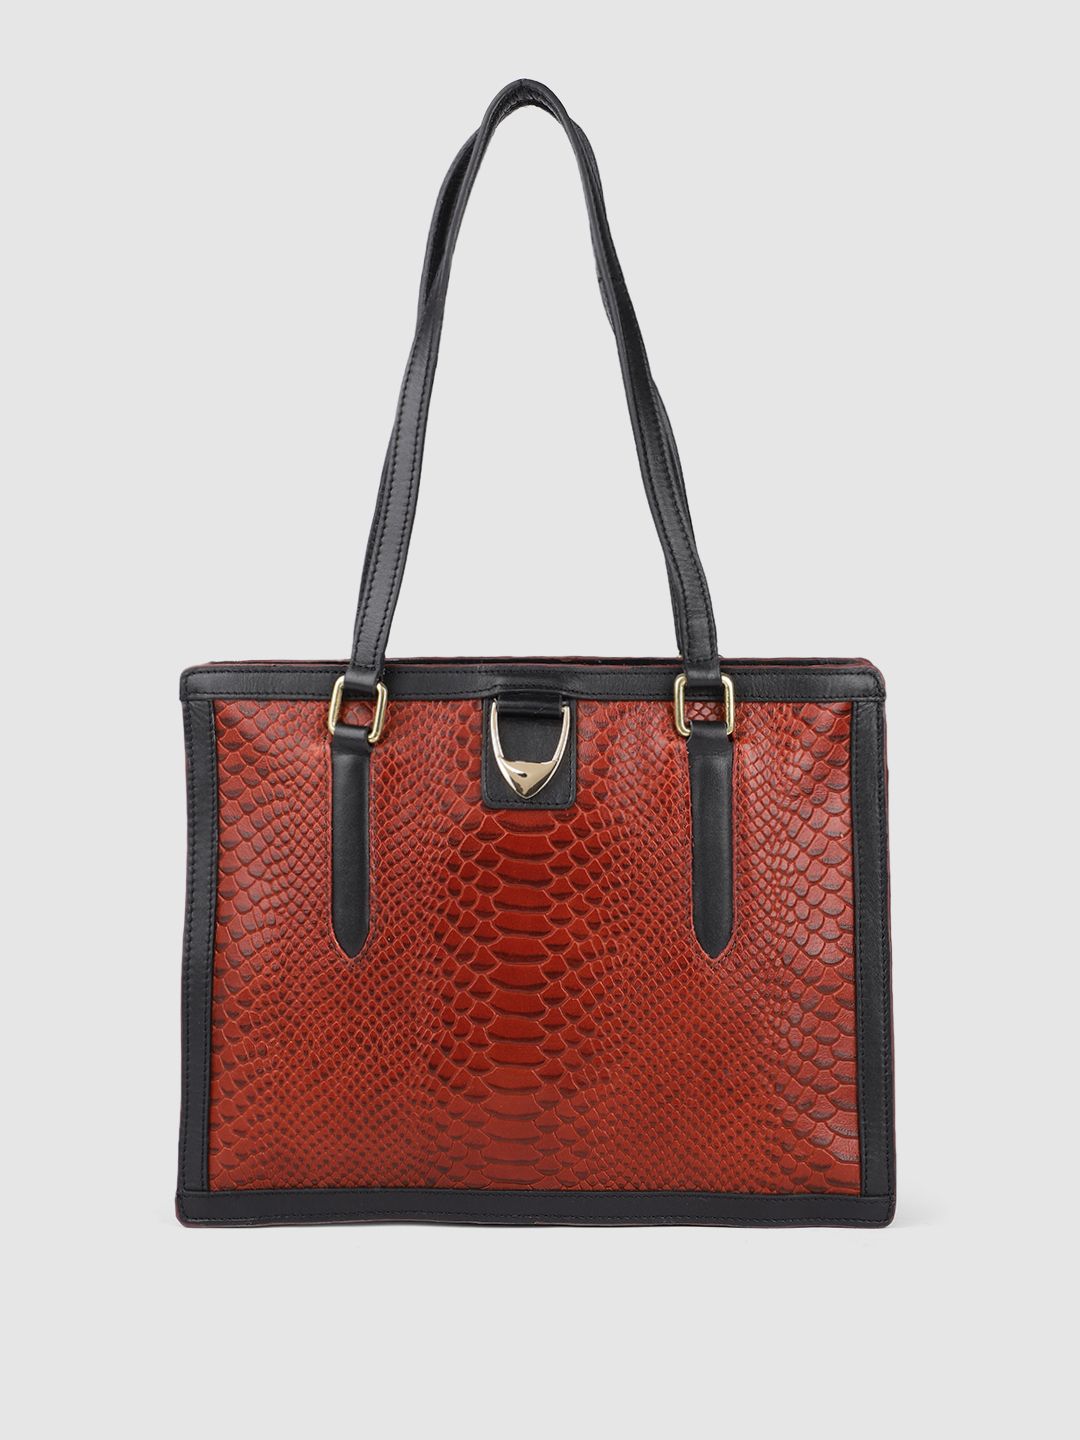 Hidesign Red Textured Leather Structured Shoulder Bag Price in India